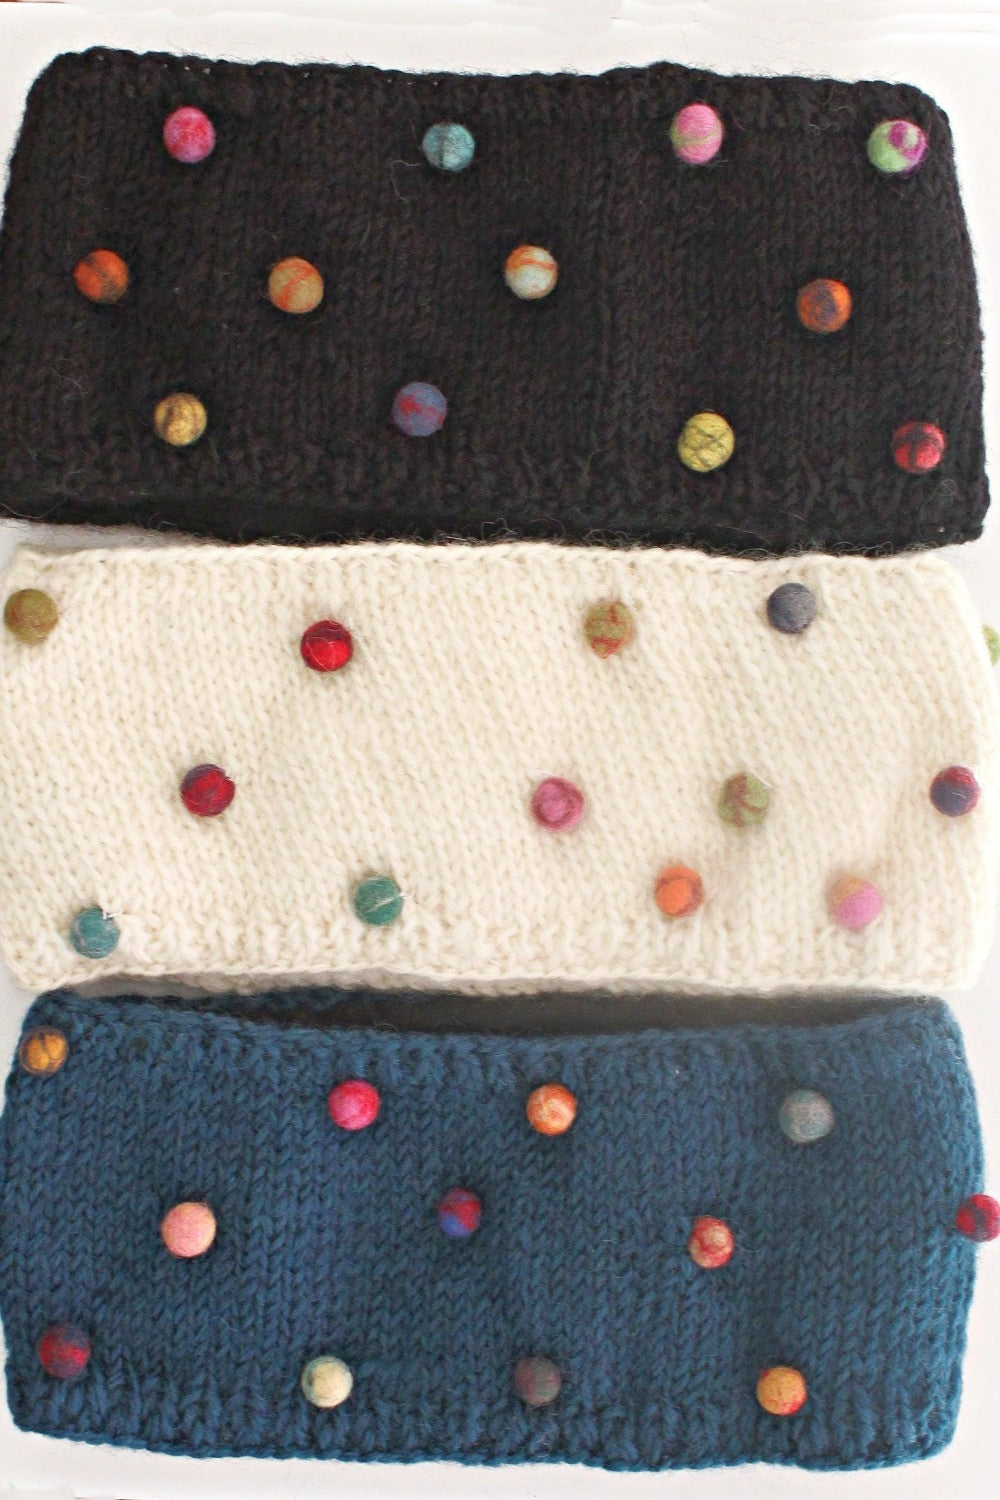  Wool Headbands in creme, black and blue. They are decorated with multi colored  Felt Dots